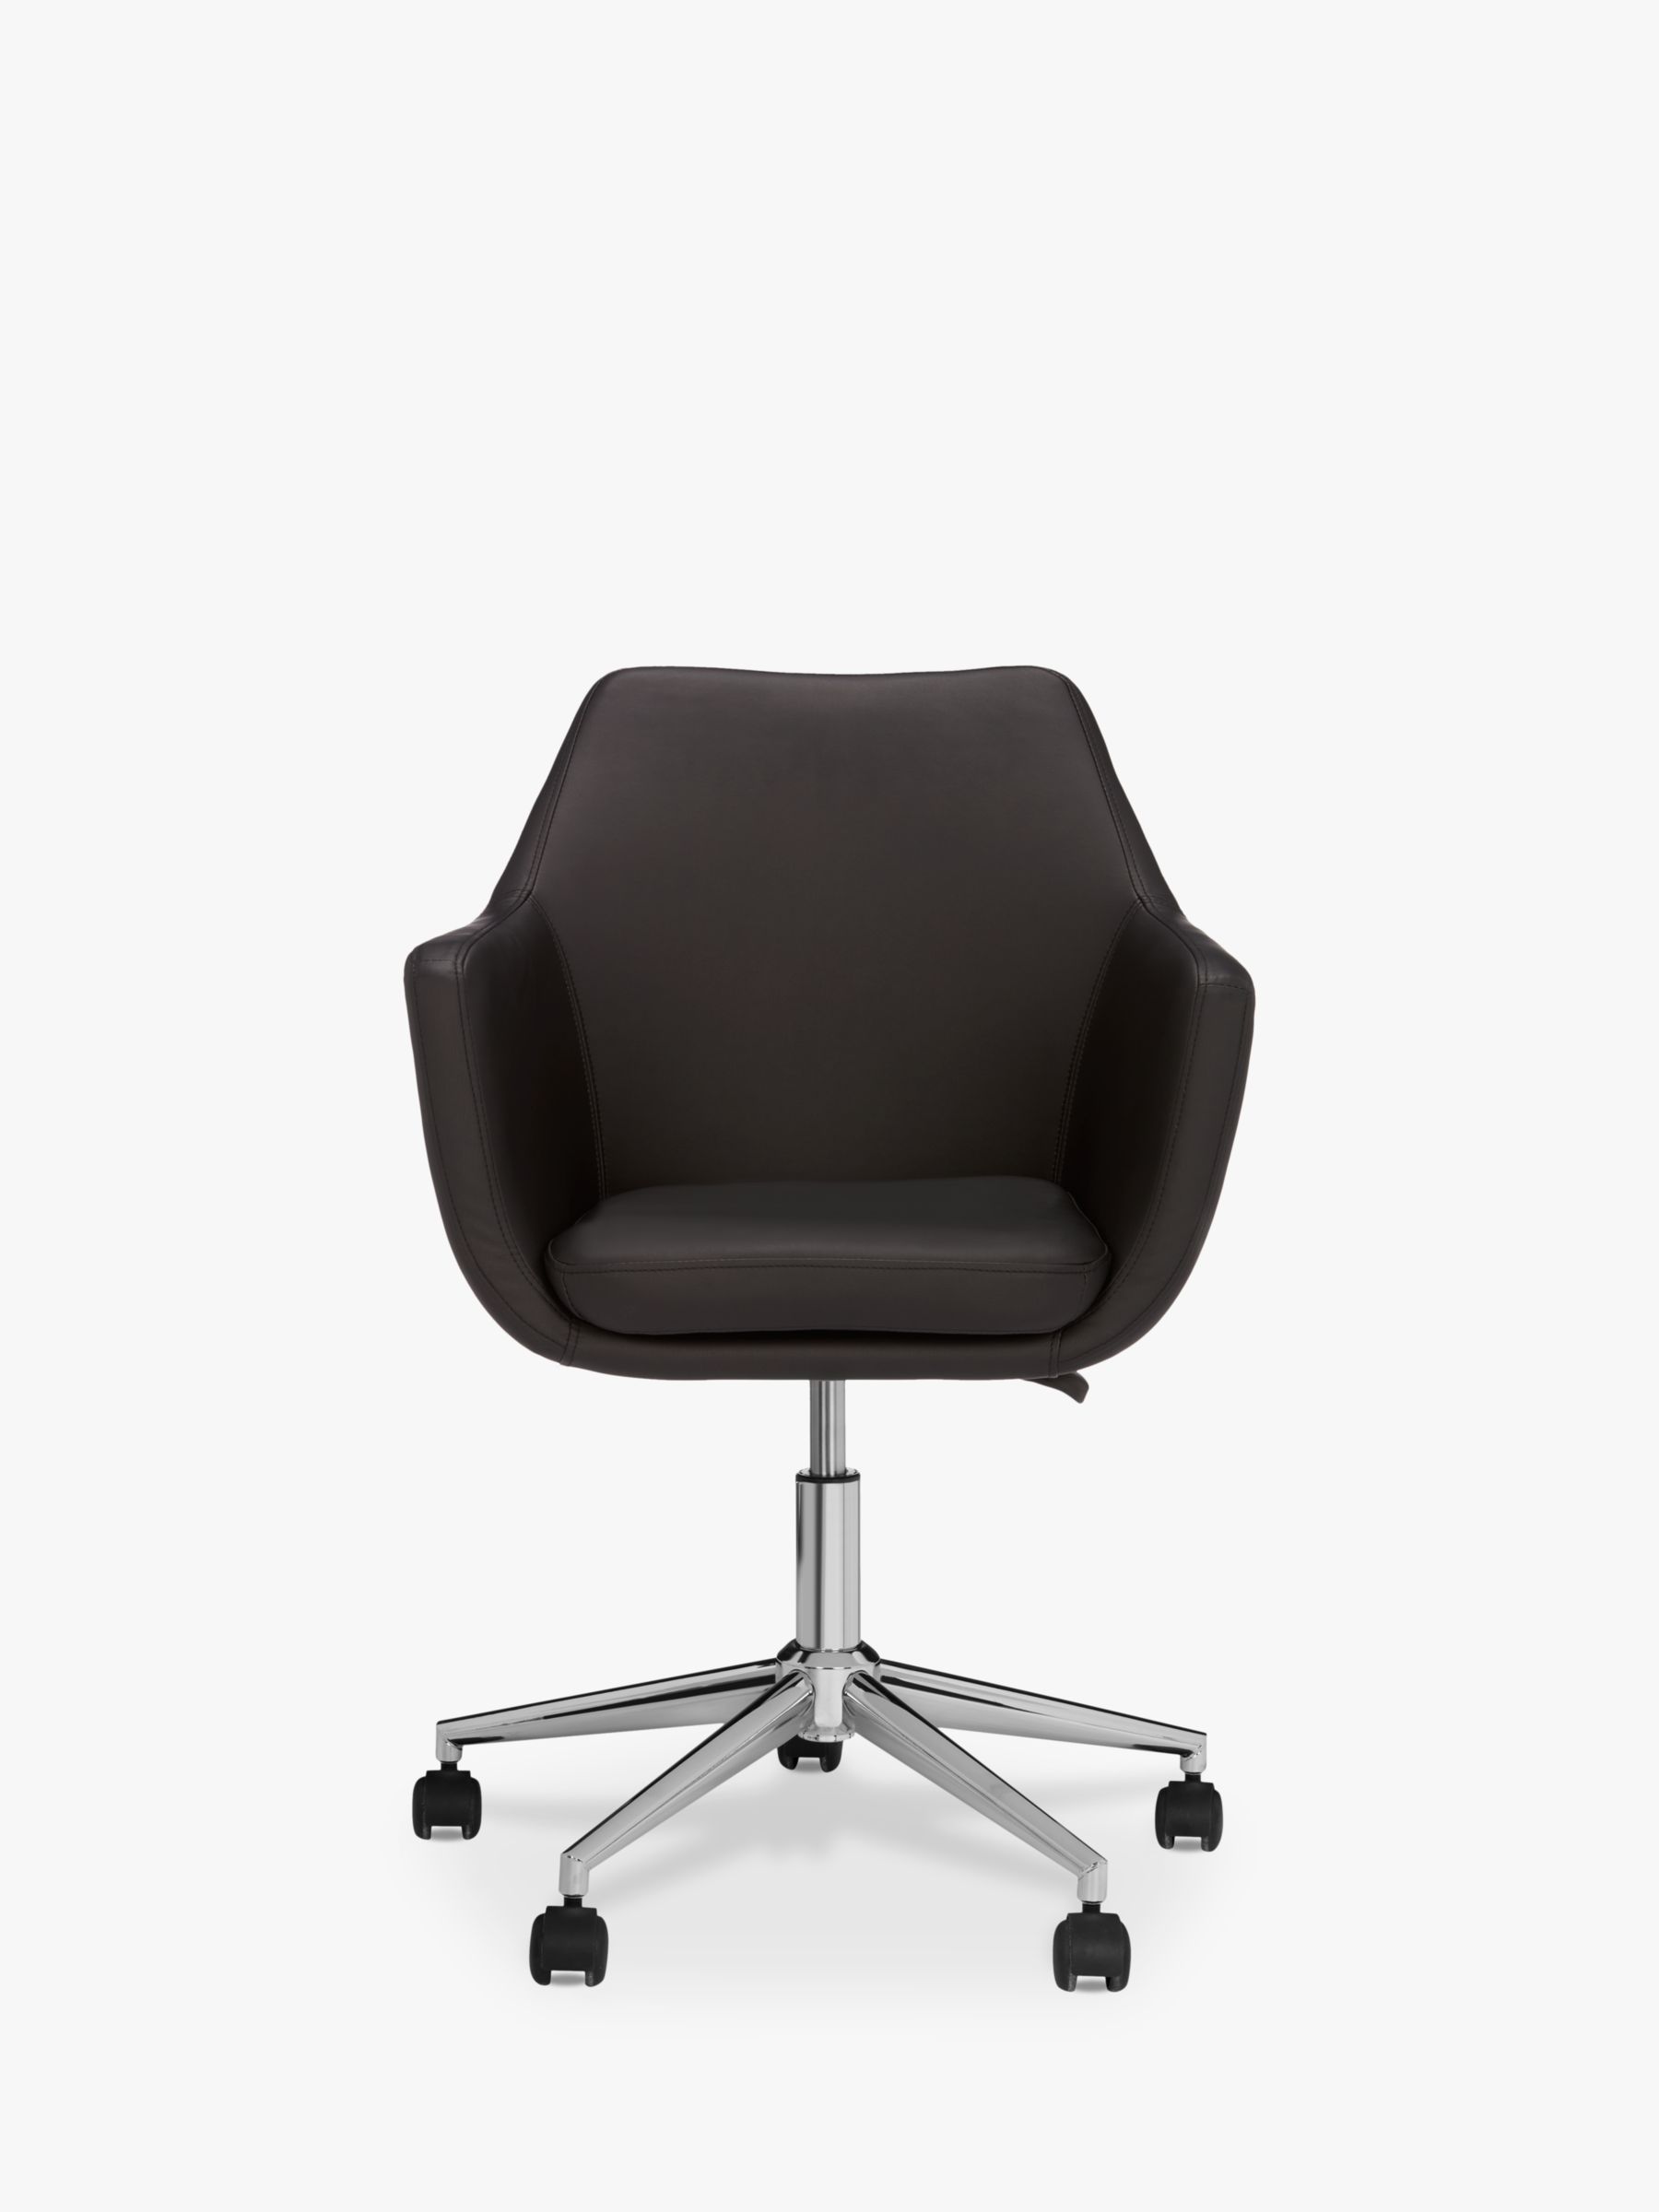 John Lewis Partners Reid Faux Leather Office Chair At John Lewis